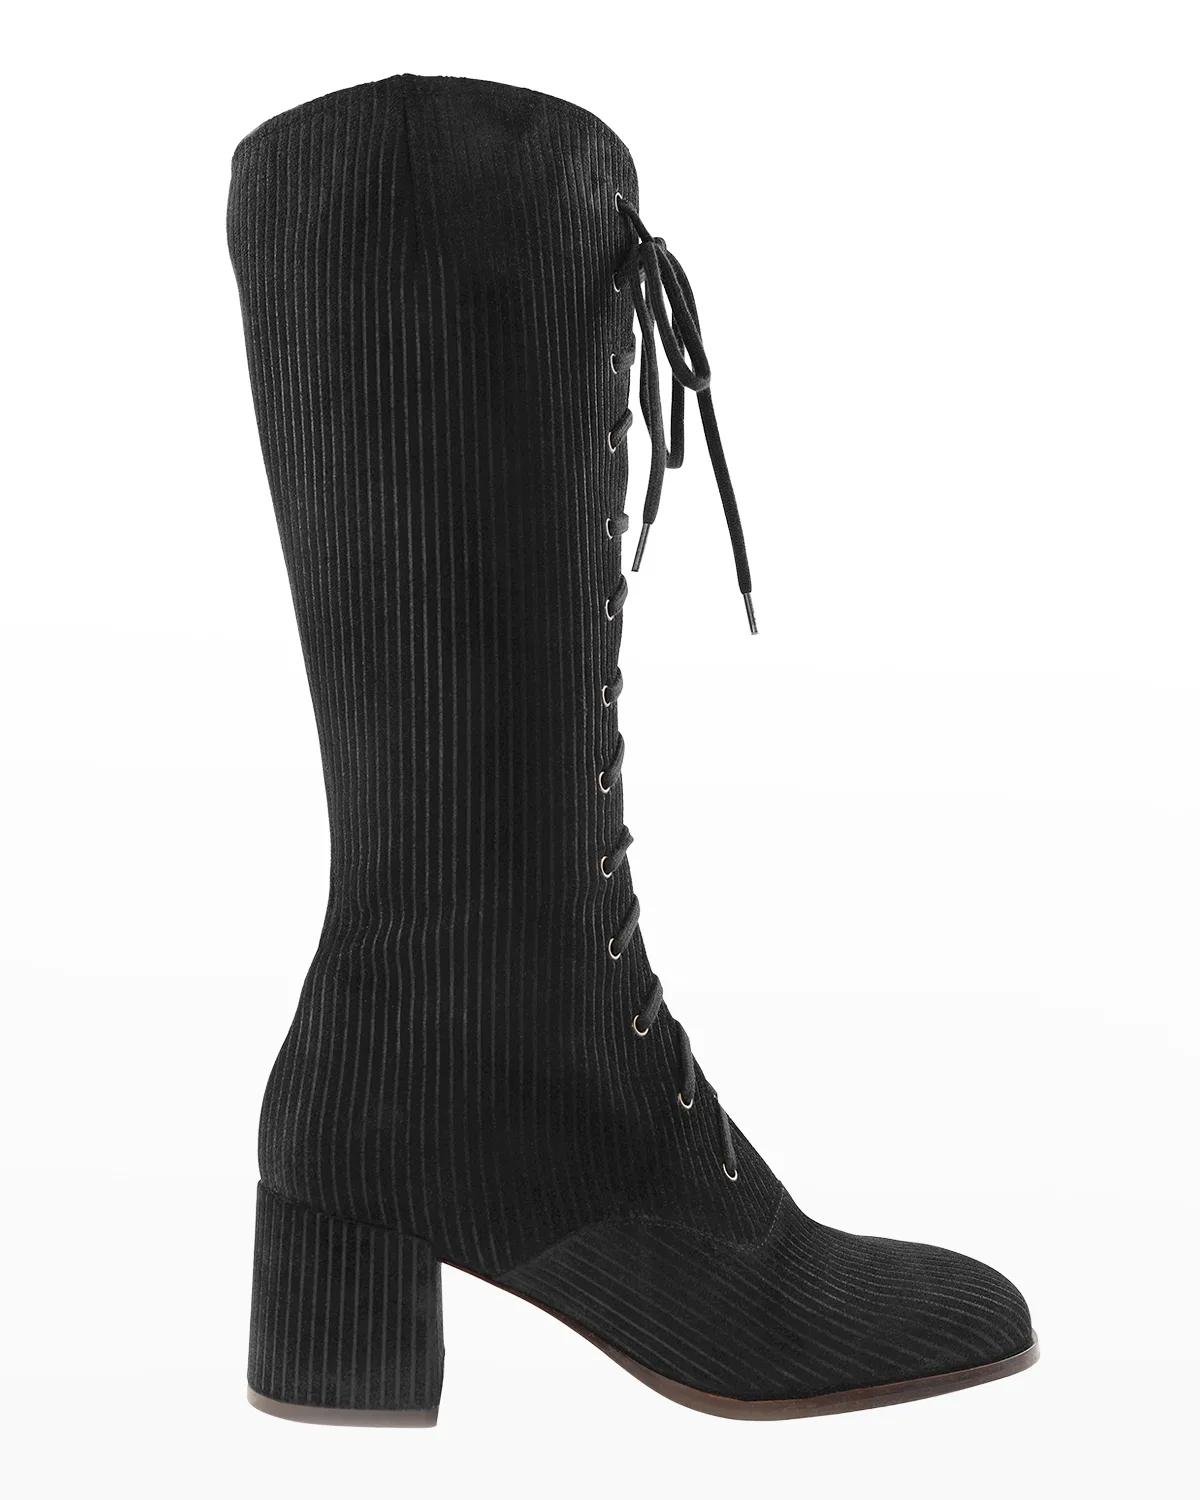 Shirac Suede Lace-Up Knee Boots by CHIE MIHARA | jellibeans